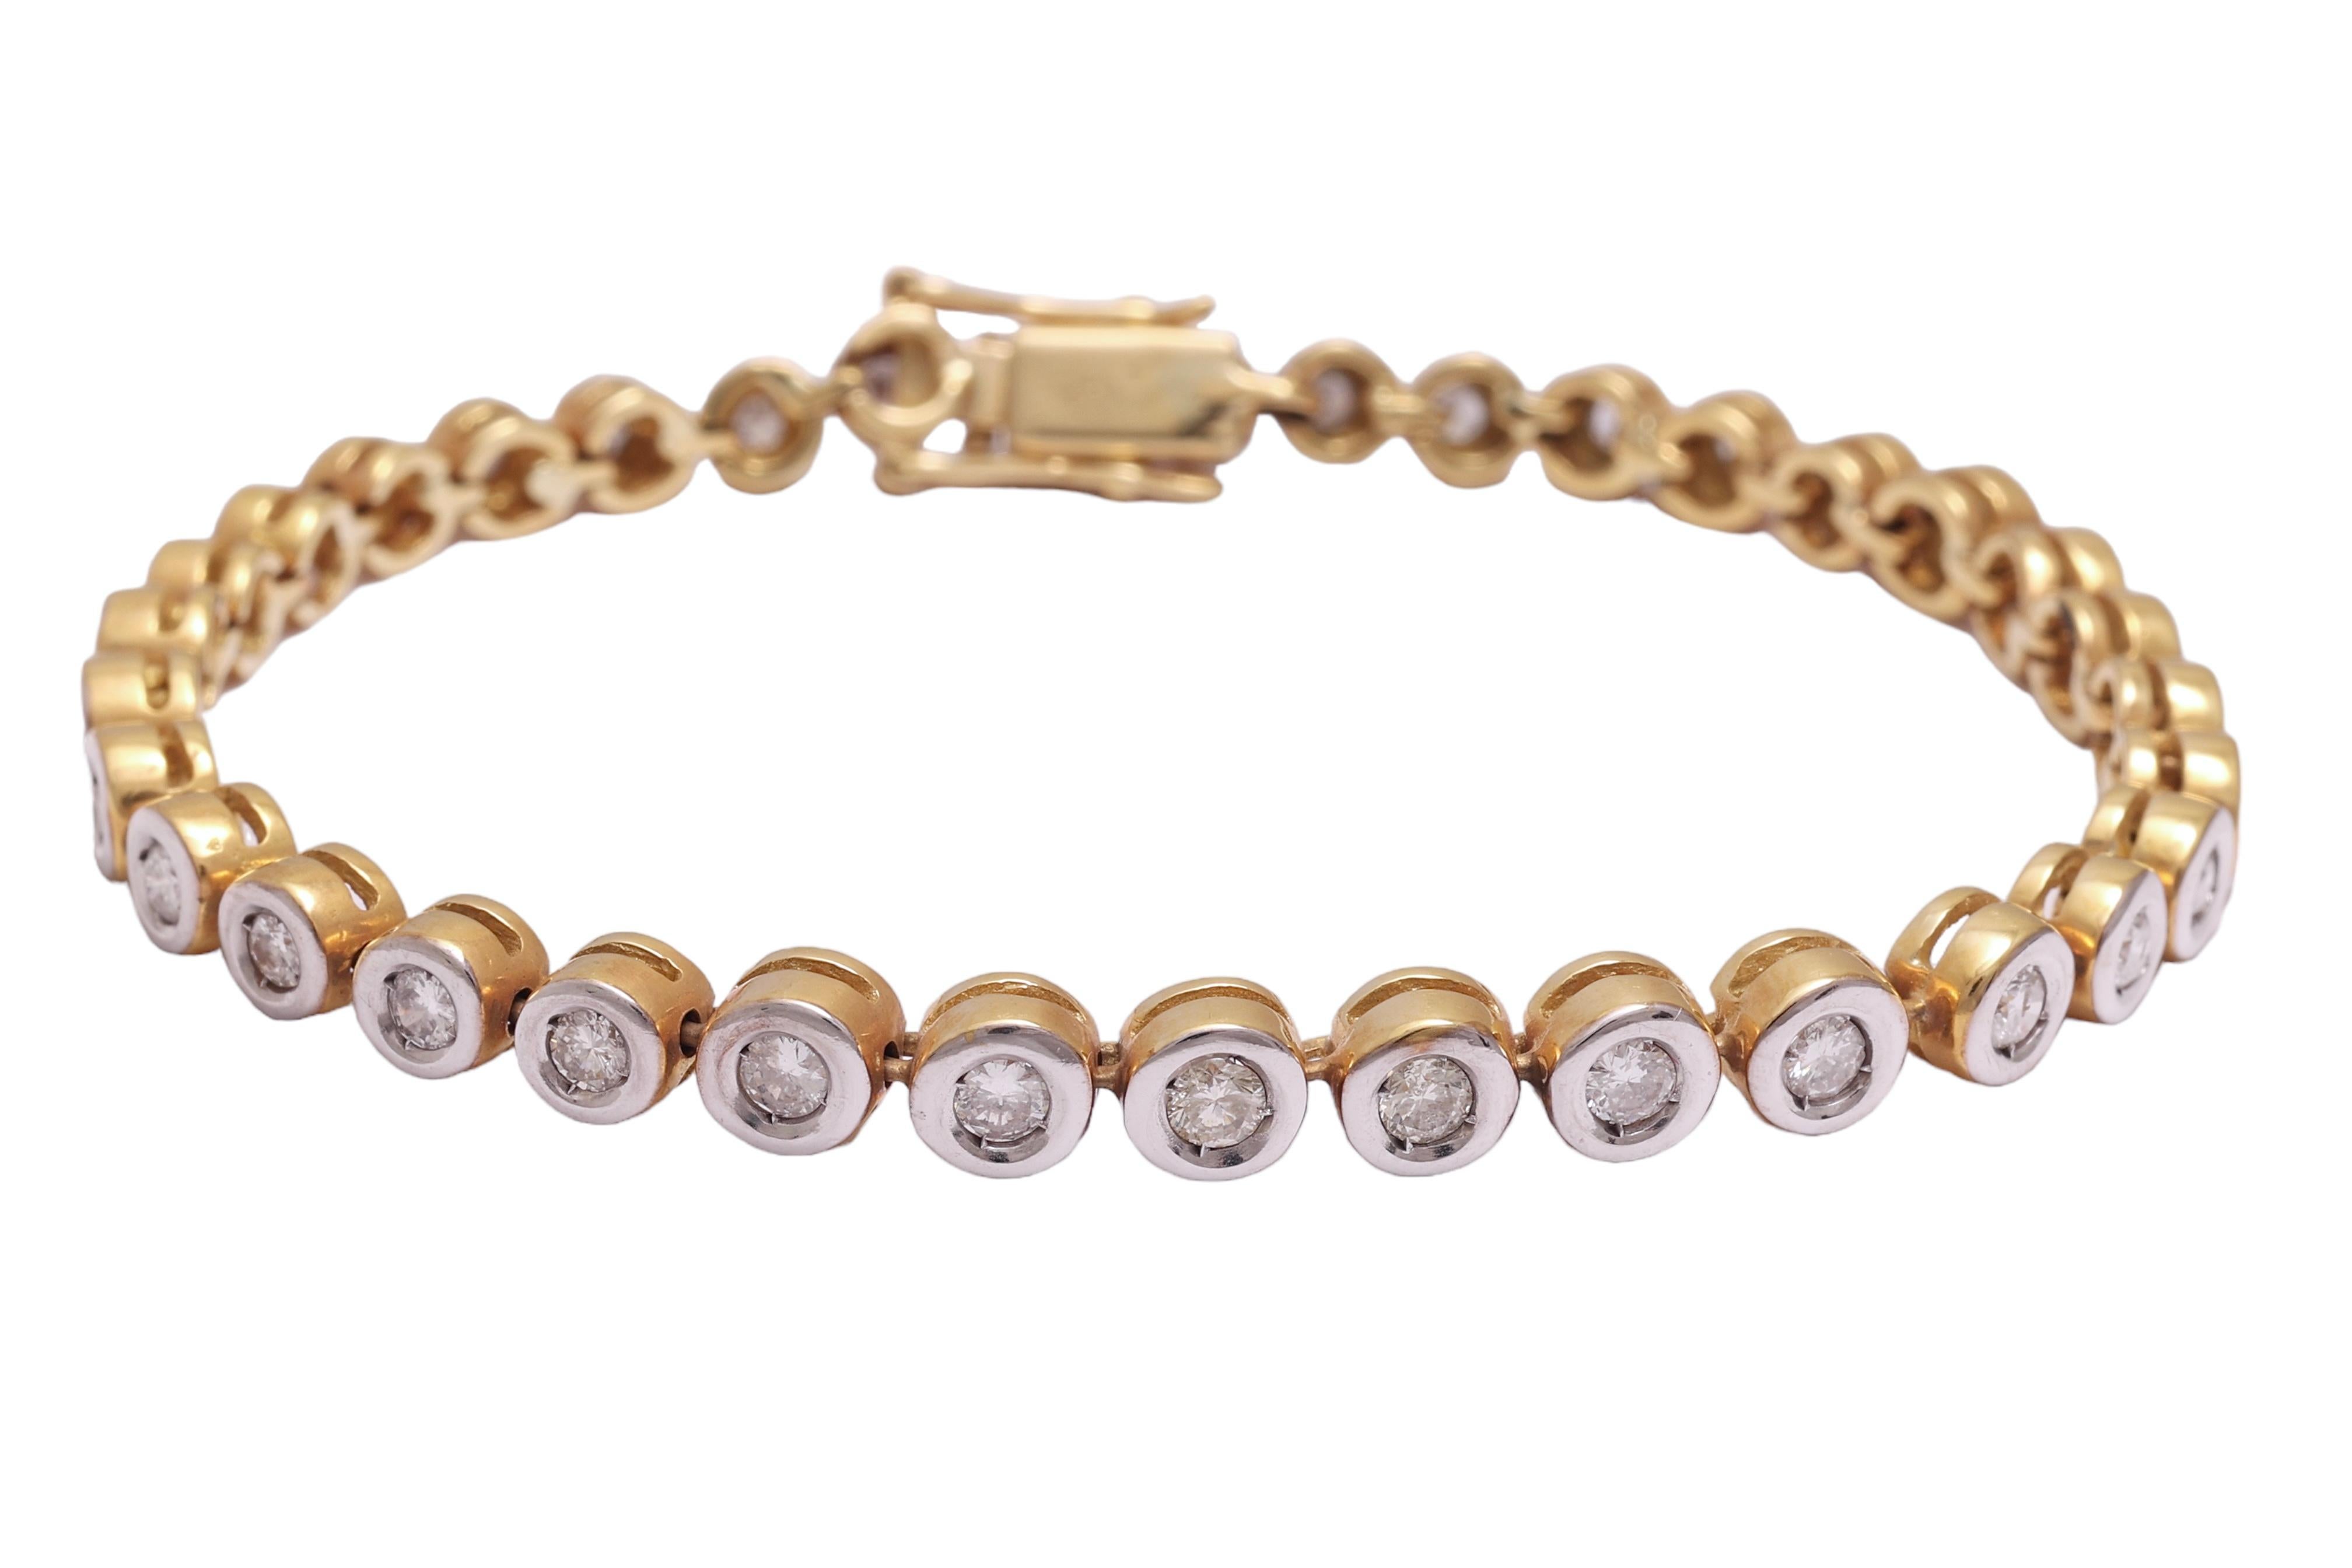 Luxurious 18 kt. Gold Bicolour Tennis Bracelet with 3.75 ct. Diamonds

Diamonds: 35 brilliant cut diamonds, together 3.75 ct.

Material: 18 kt. yellow and white gold

Measurements: Will max fit a 19 cm wrist

Total weight: 23.1 grams / 14.9 dwt /